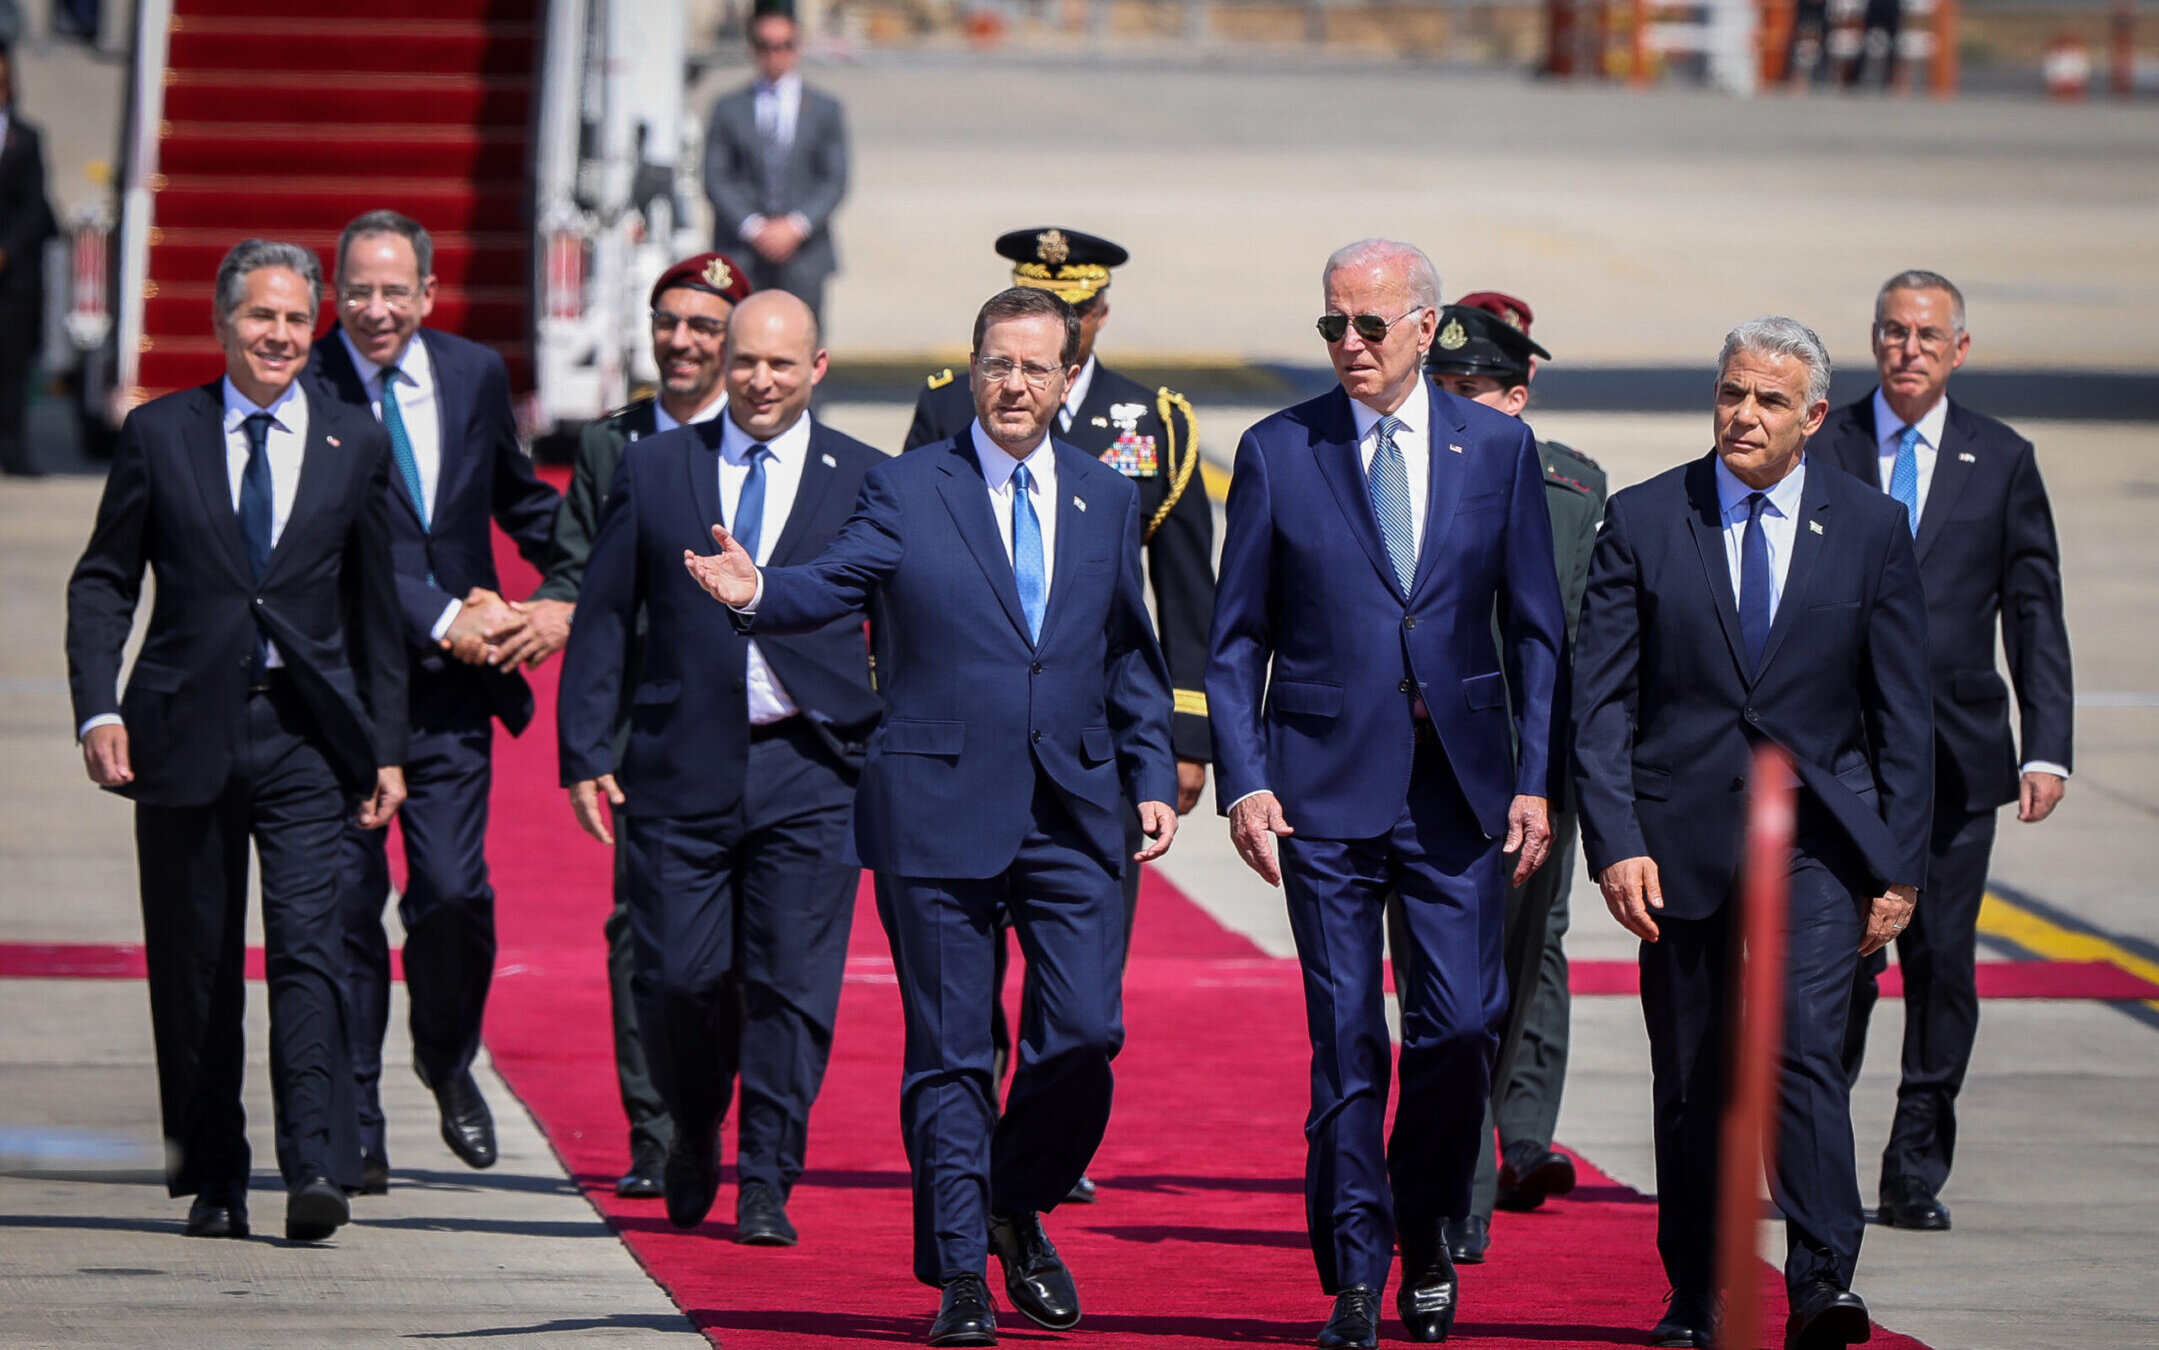 U.S. President Joe Biden, with Israeli Prime Minister Yair Lapid at his left and Israeli President Isaac Herzog on his right at a welcome ceremony at Ben Gurion Airport near Tel Aviv, July 13, 2022. (Noam Revkin Fenton/Flash90)